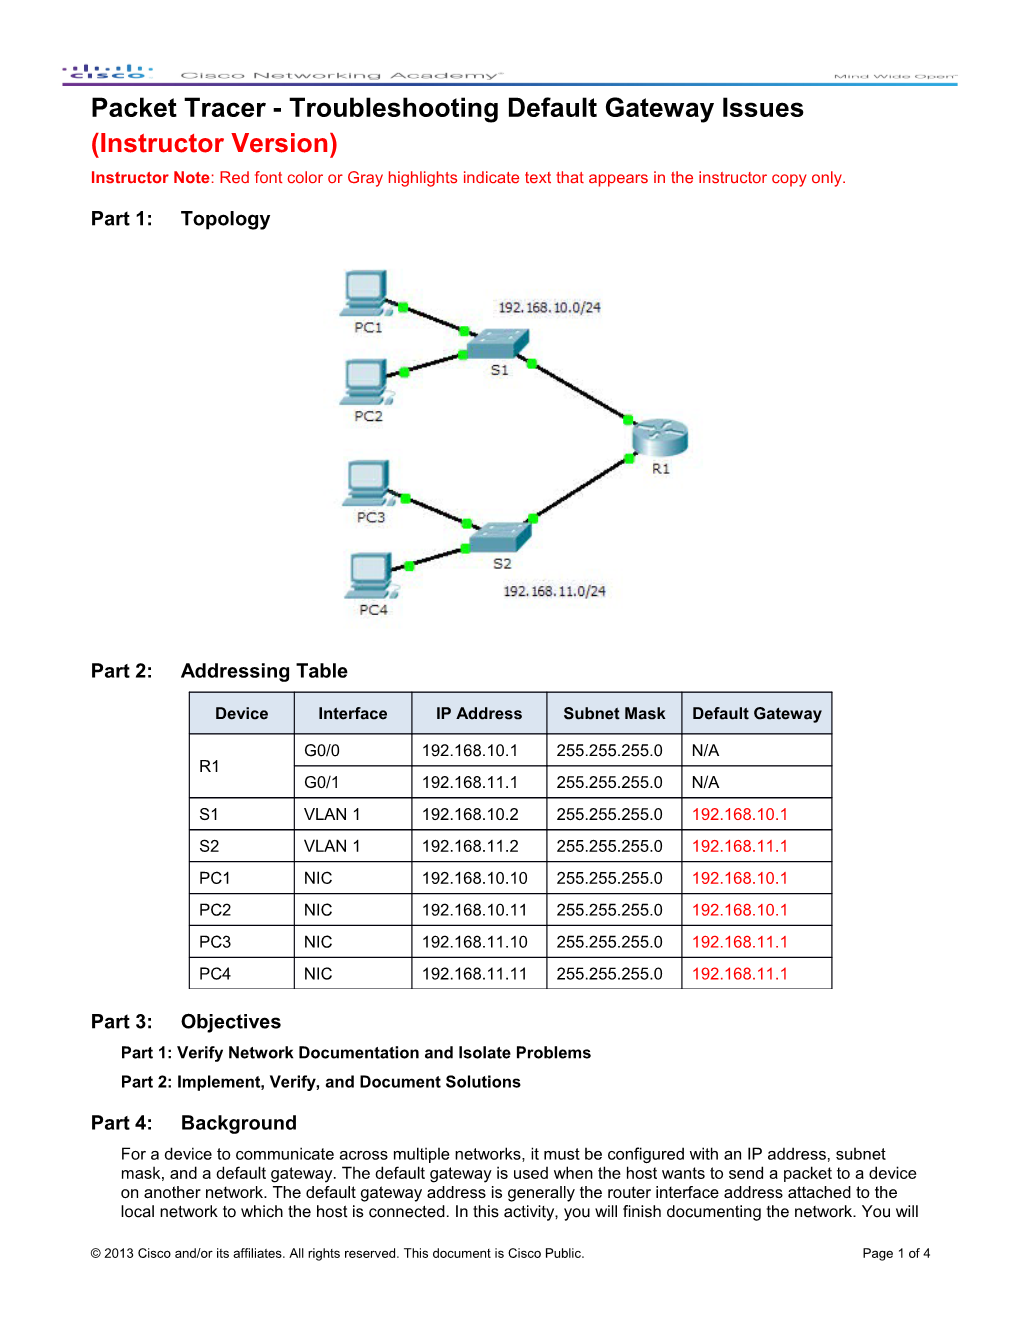 Packet Tracer - Troubleshooting Default Gateway Issues